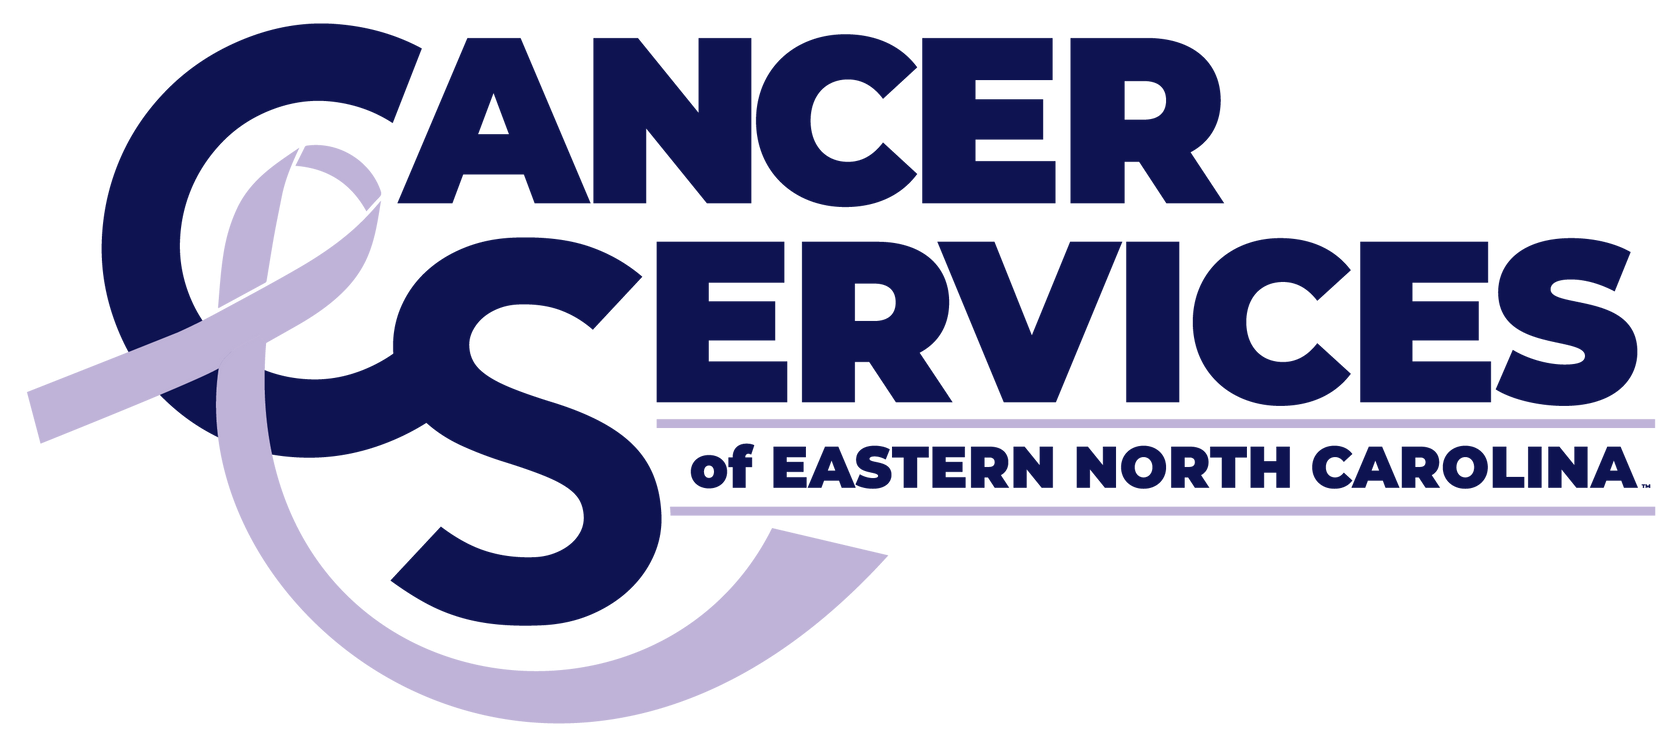 The logo for cancer services of eastern north carolina